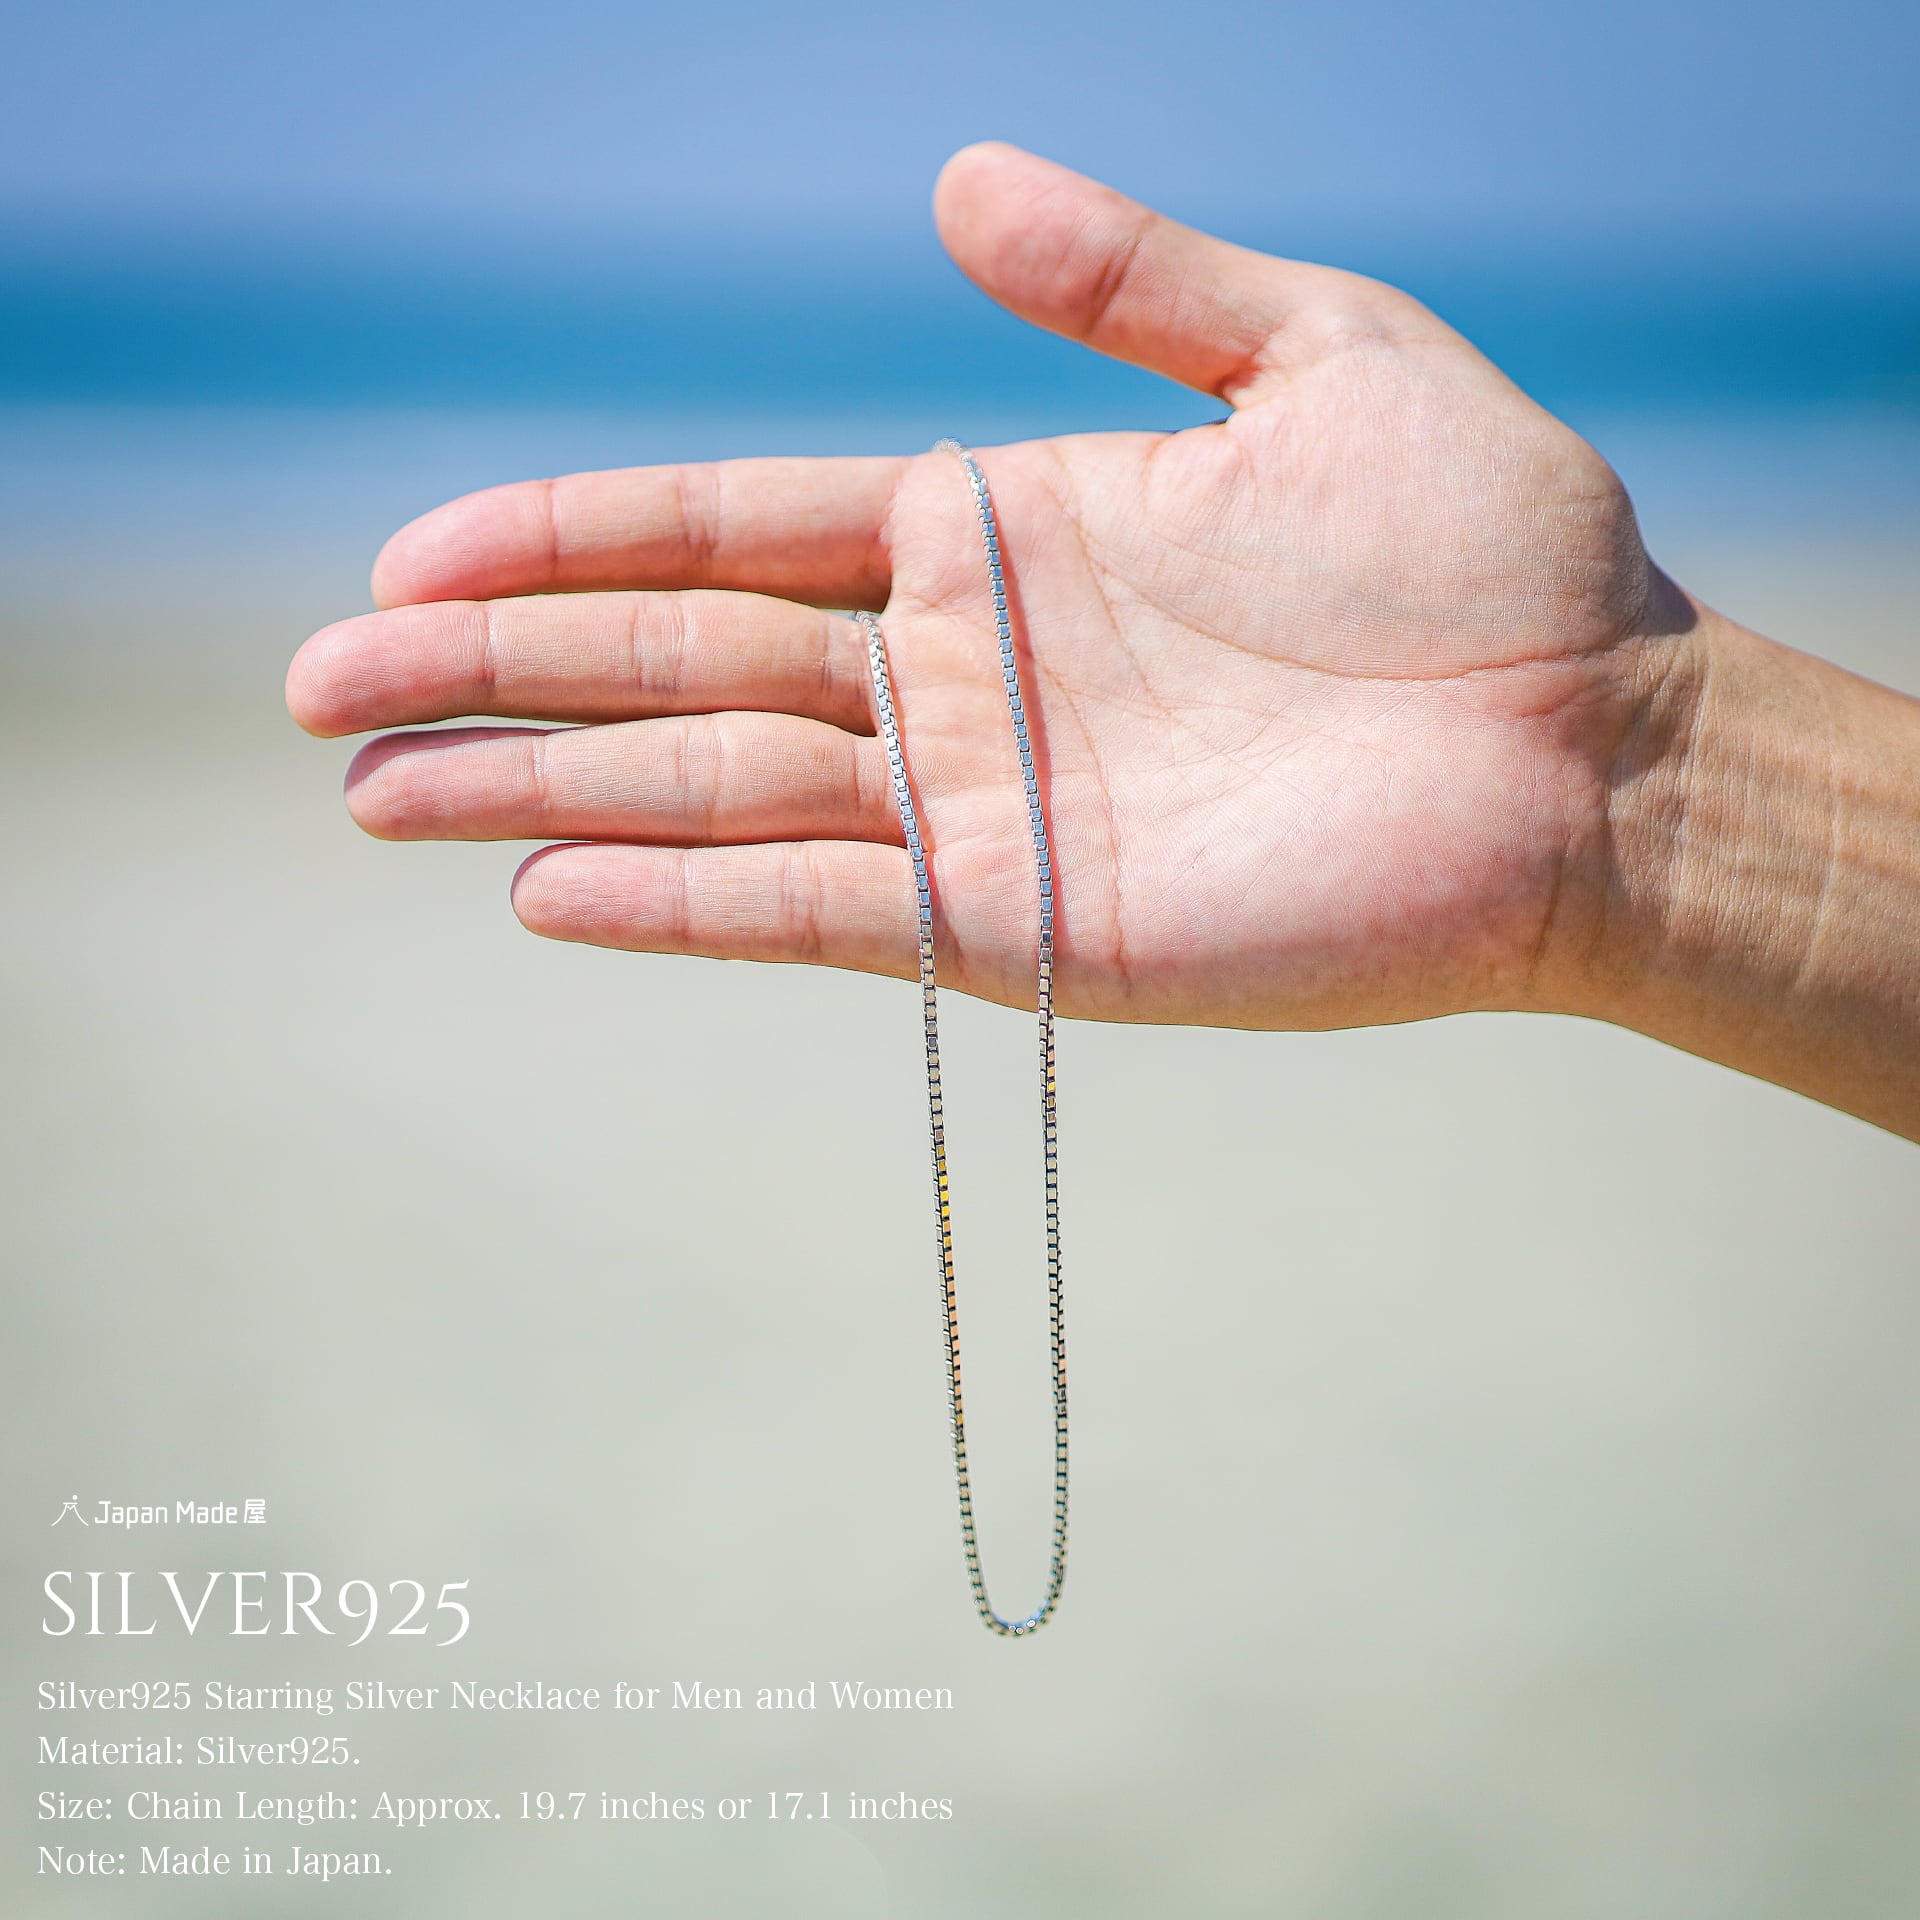 "Necklace" that exudes adult dignity (Silver925)